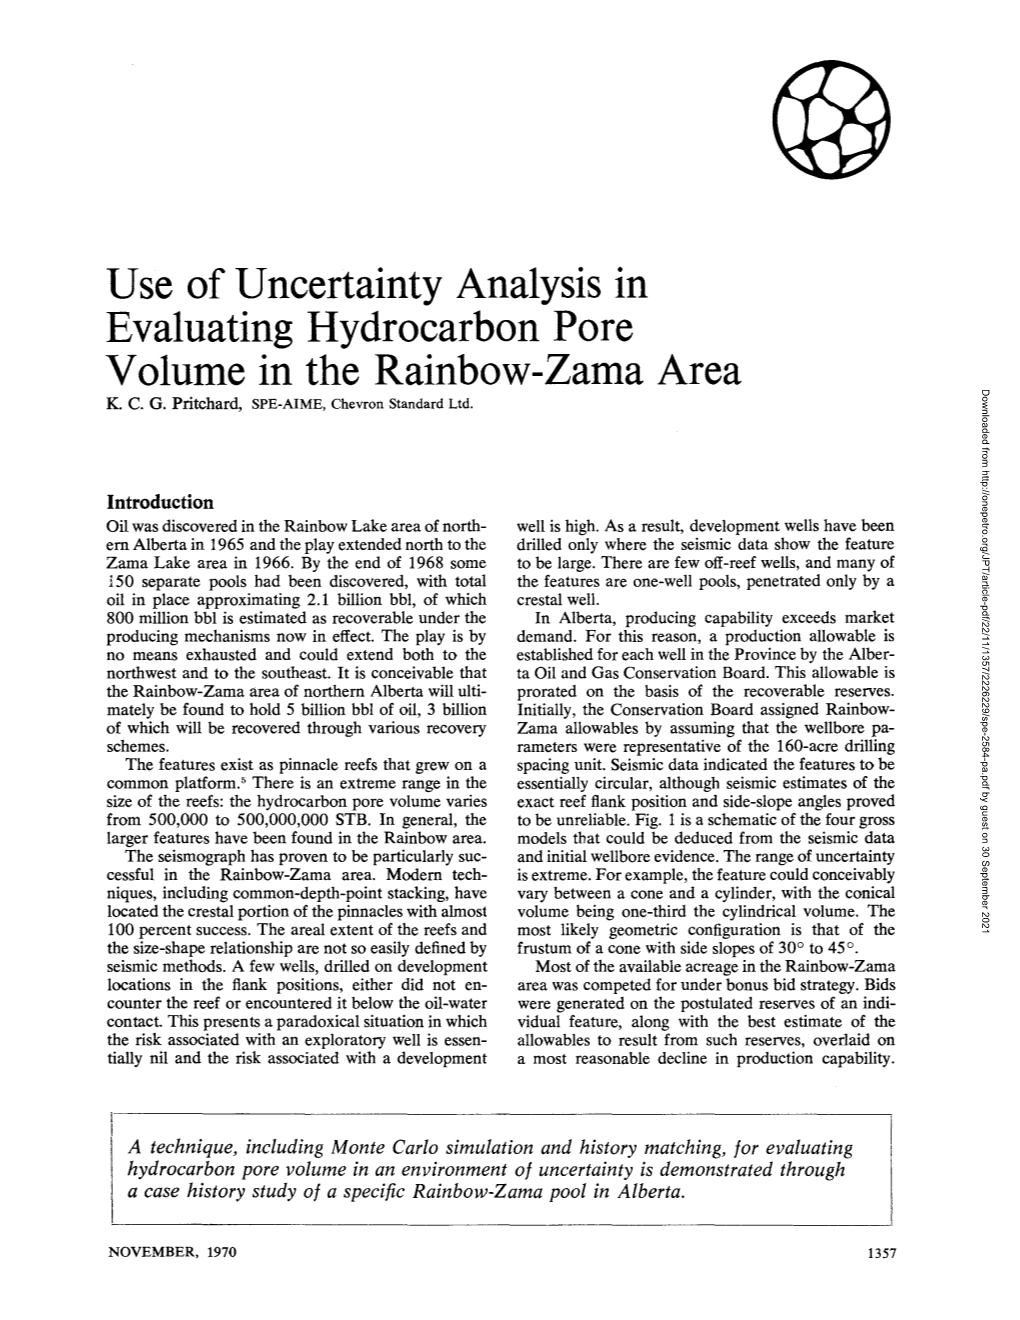 Use of Uncertainty Analysis in Evaluating Hydrocarbon Pore